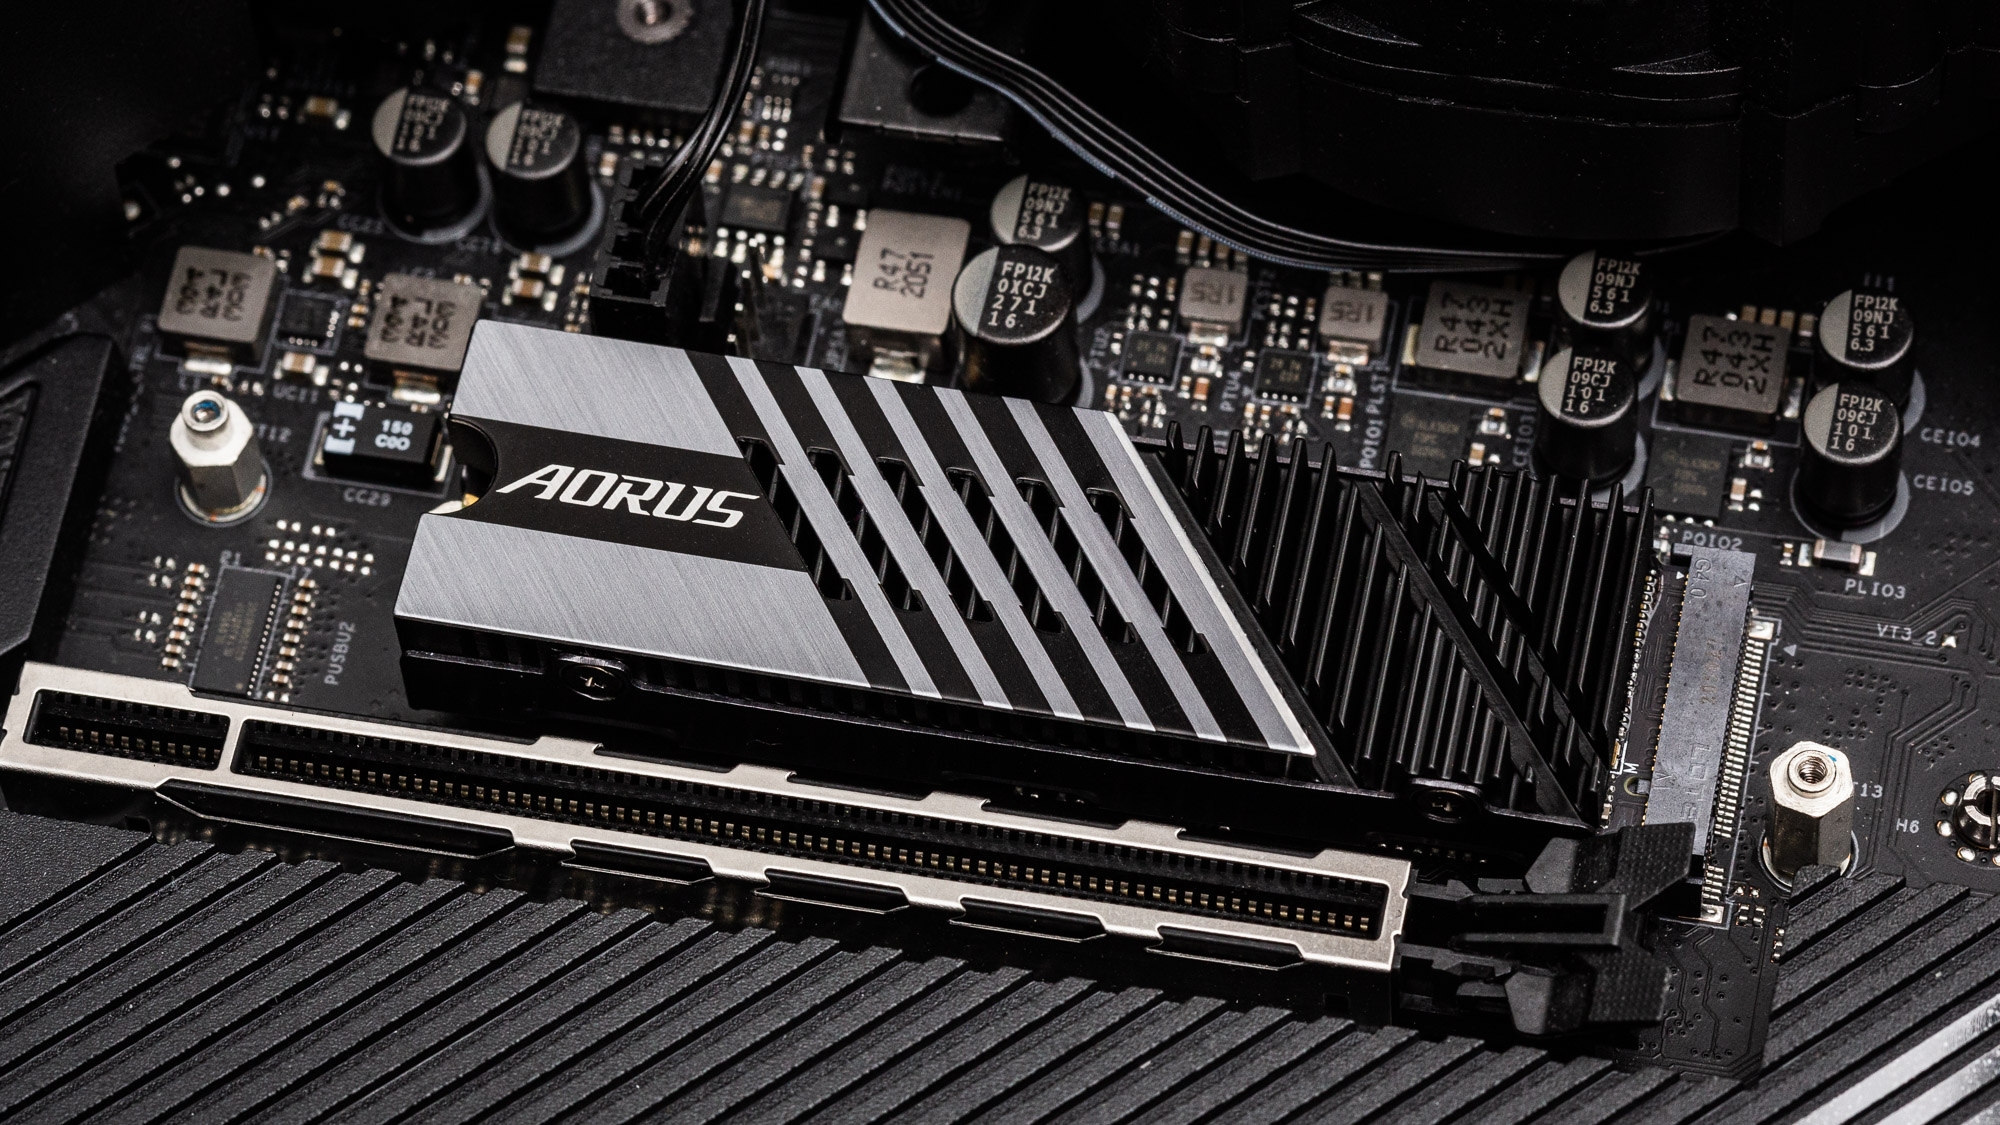 Gigabyte Aorus Gen4 7000s M.2 NVMe SSD Review: Nanocarbon Cooled for Speed